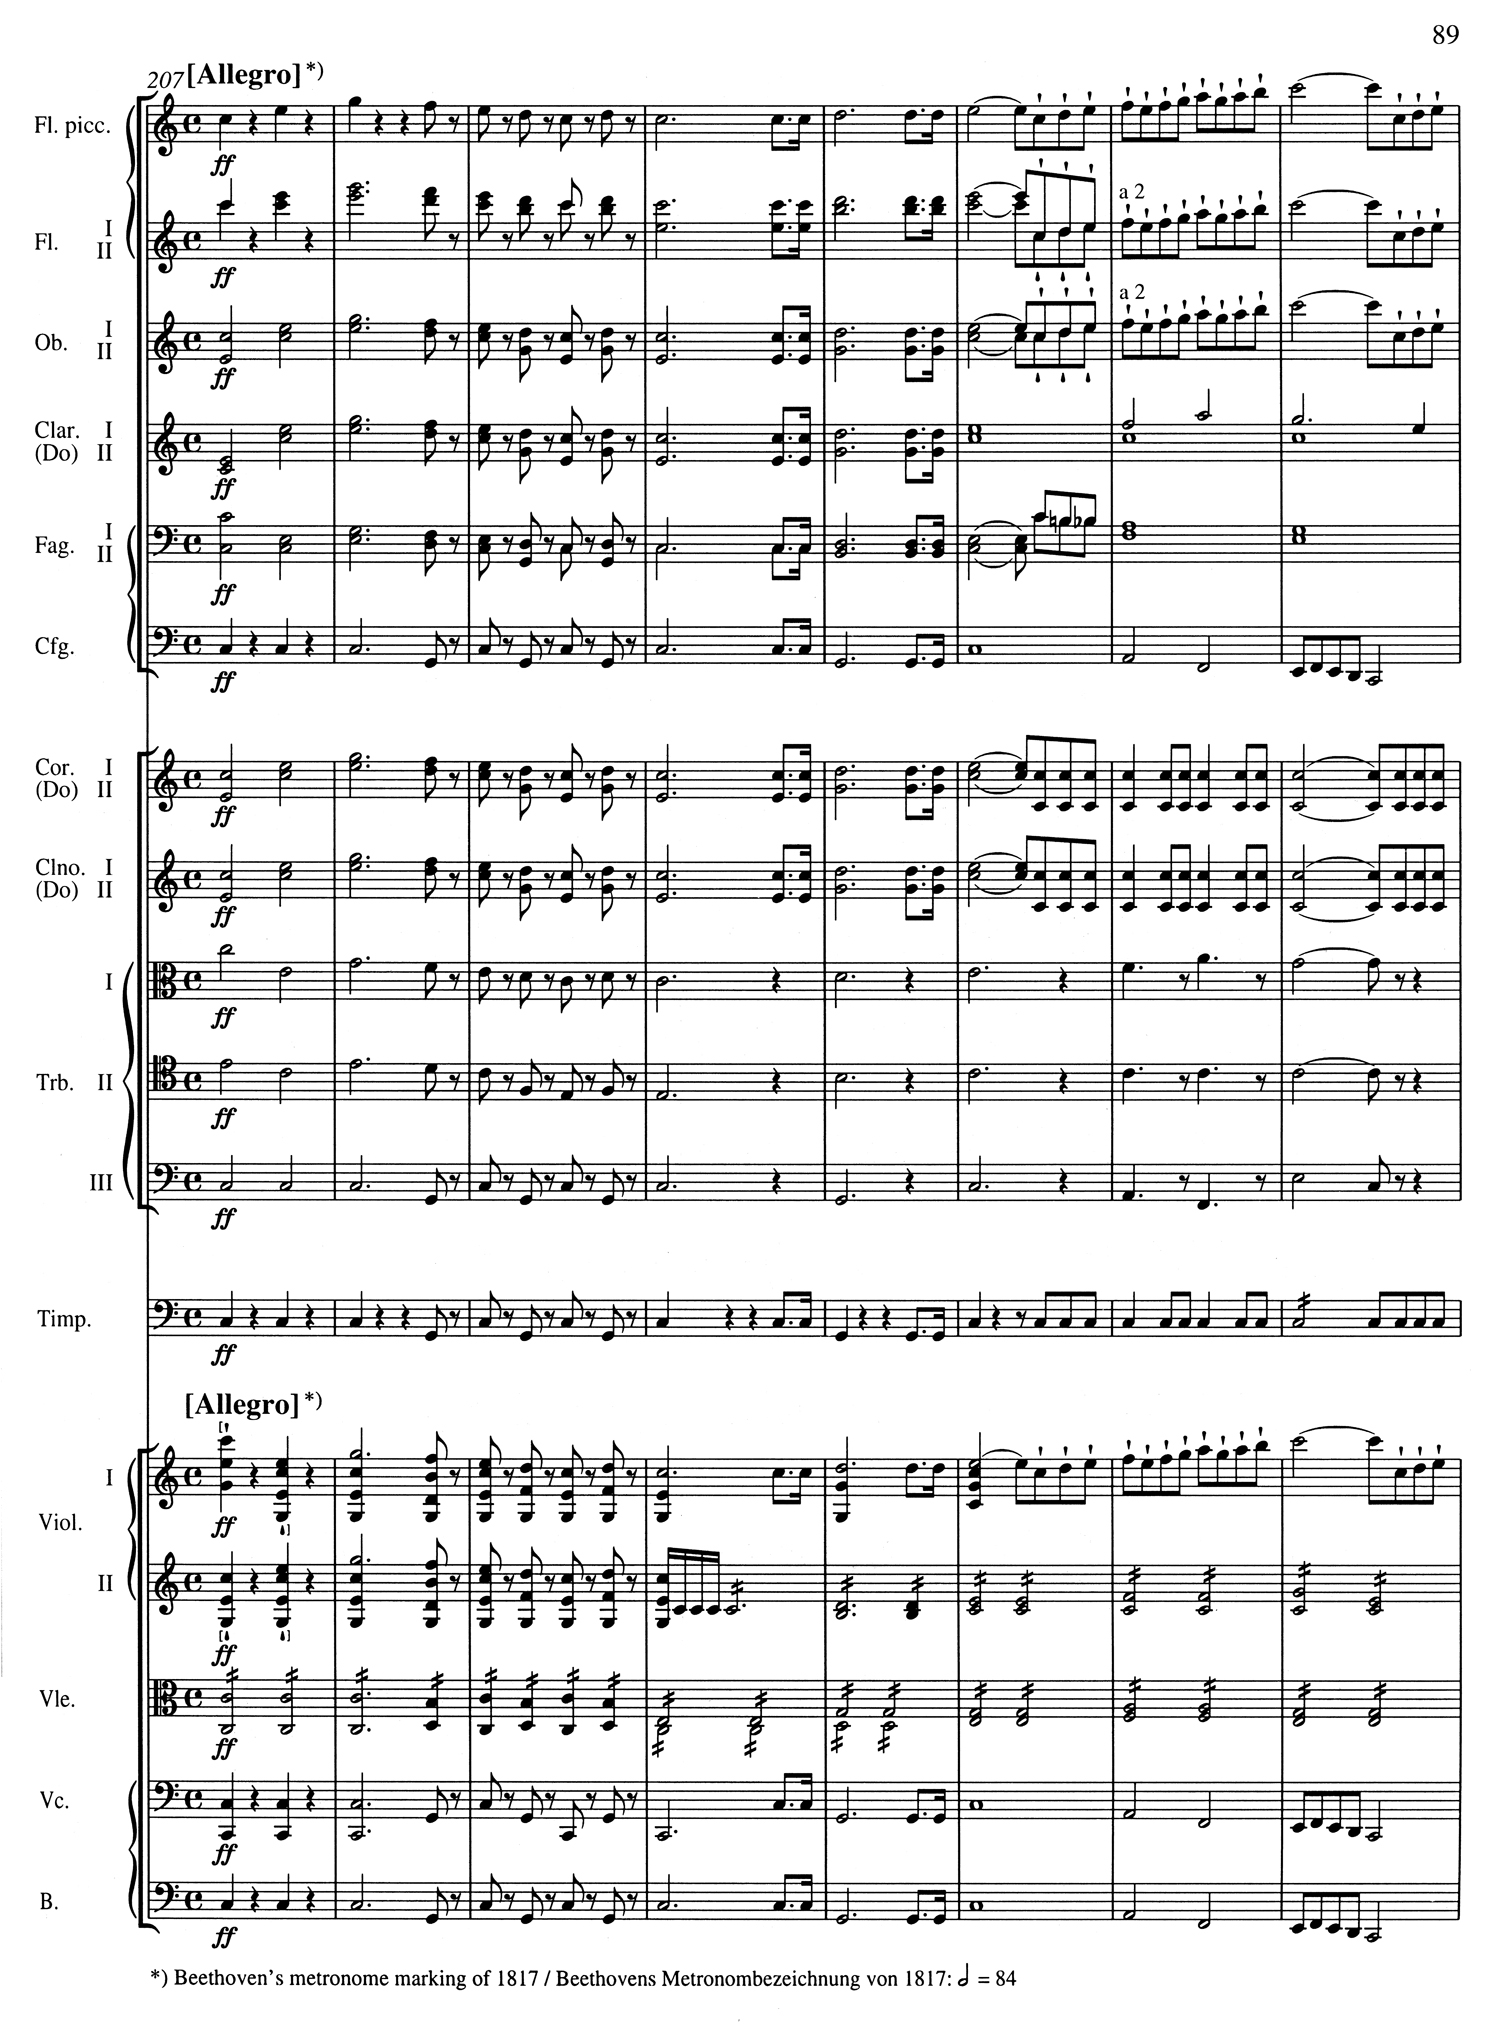 Beethoven 5 Score Page 1.jpg